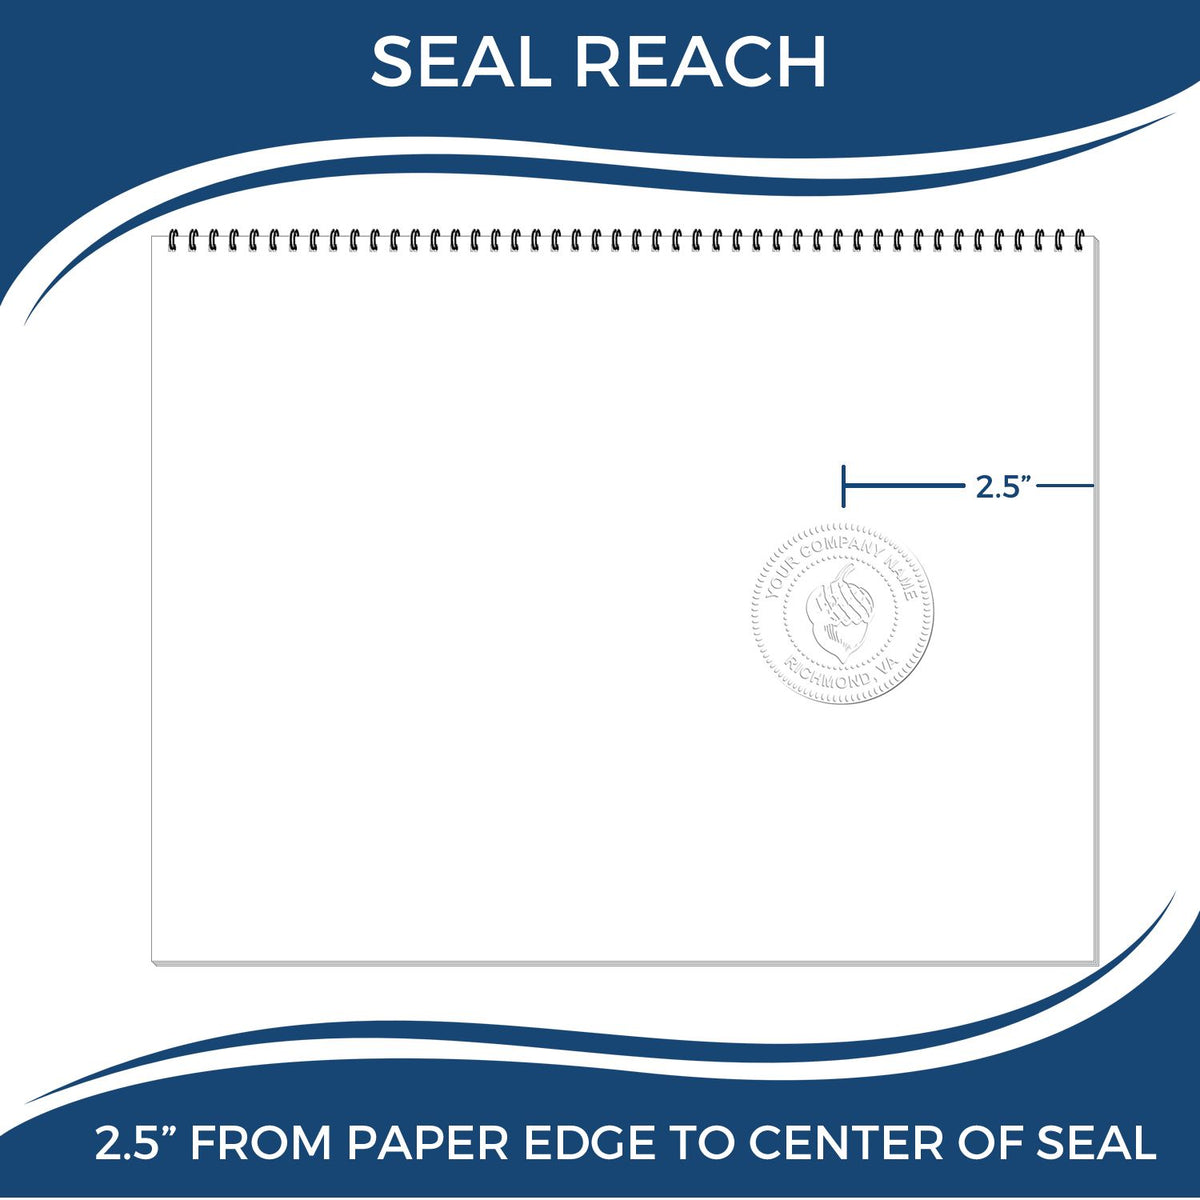 An infographic showing the seal reach which is represented by a ruler and a miniature seal image of the Long Reach Florida Geology Seal